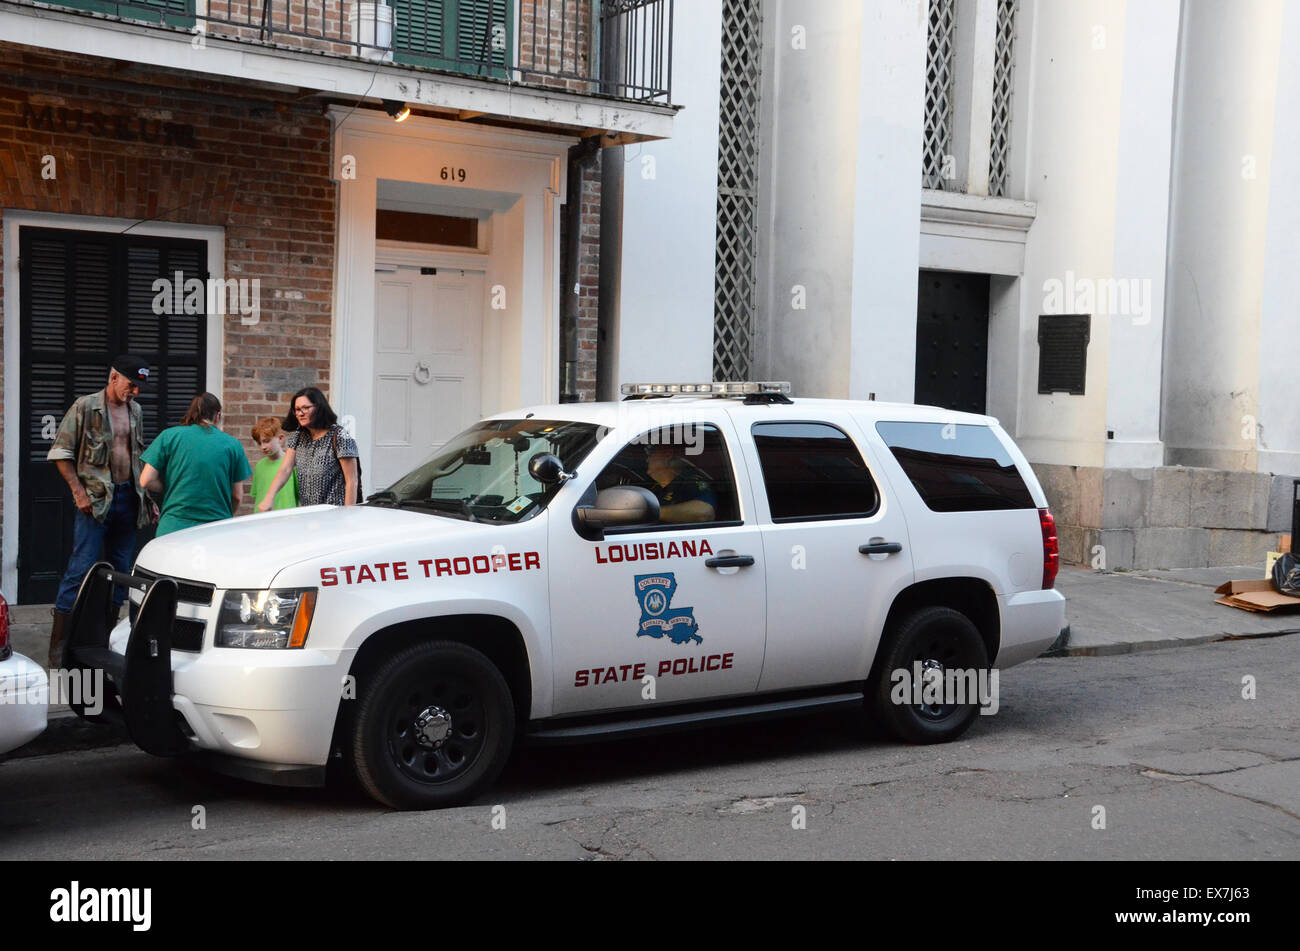 louisiana state trooper car french quarter new orleans Stock Photo